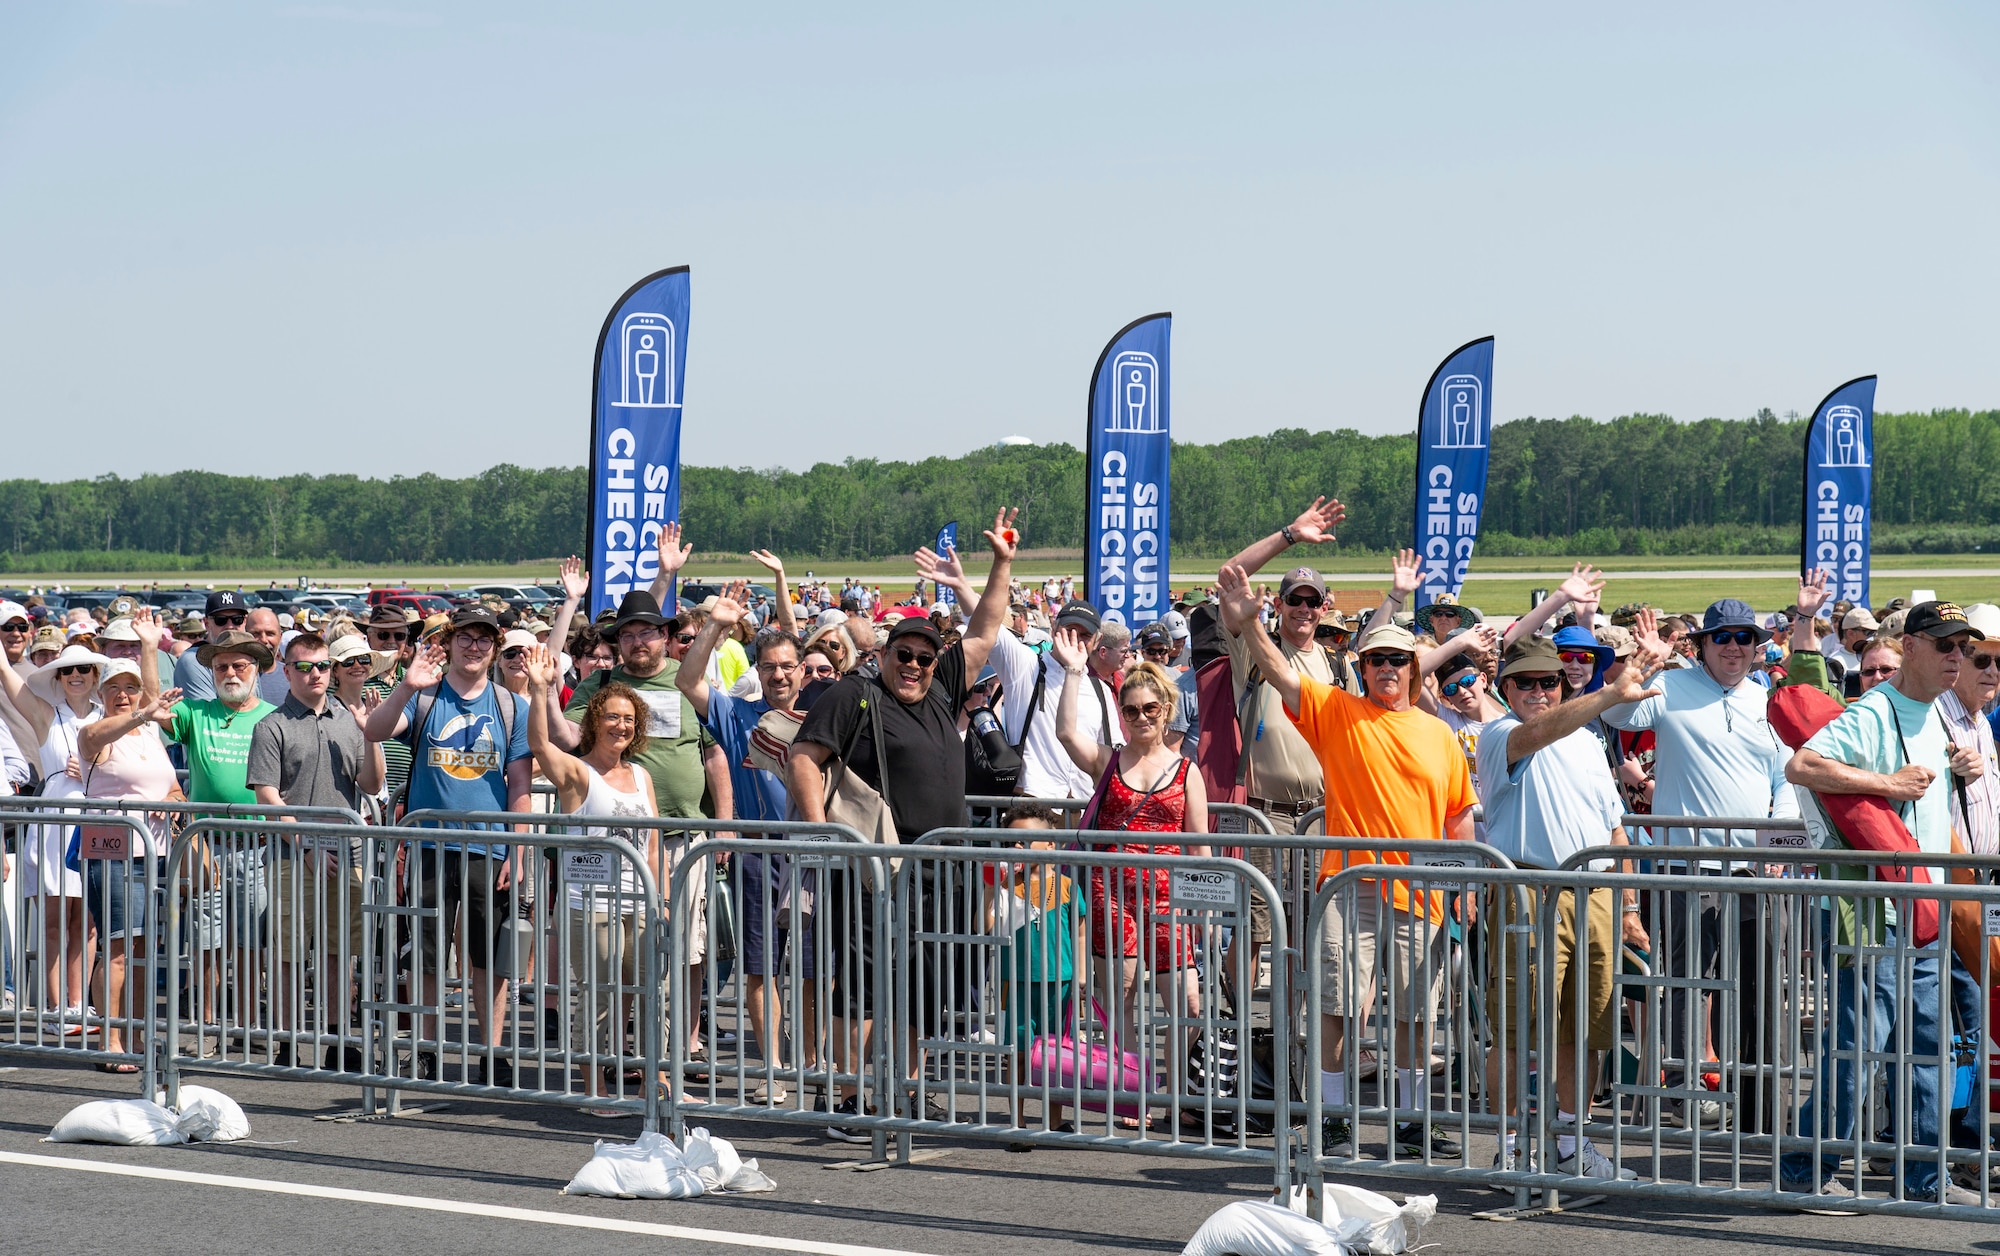 Airshow spectators line up to enter the 2022 Thunder Over Dover Airshow at Dover Air Force Base, Delaware, May 21, 2022. More than 75,000 spectators witnessed the show during the weekend event. (U.S. Air Force photo by Roland Balik)